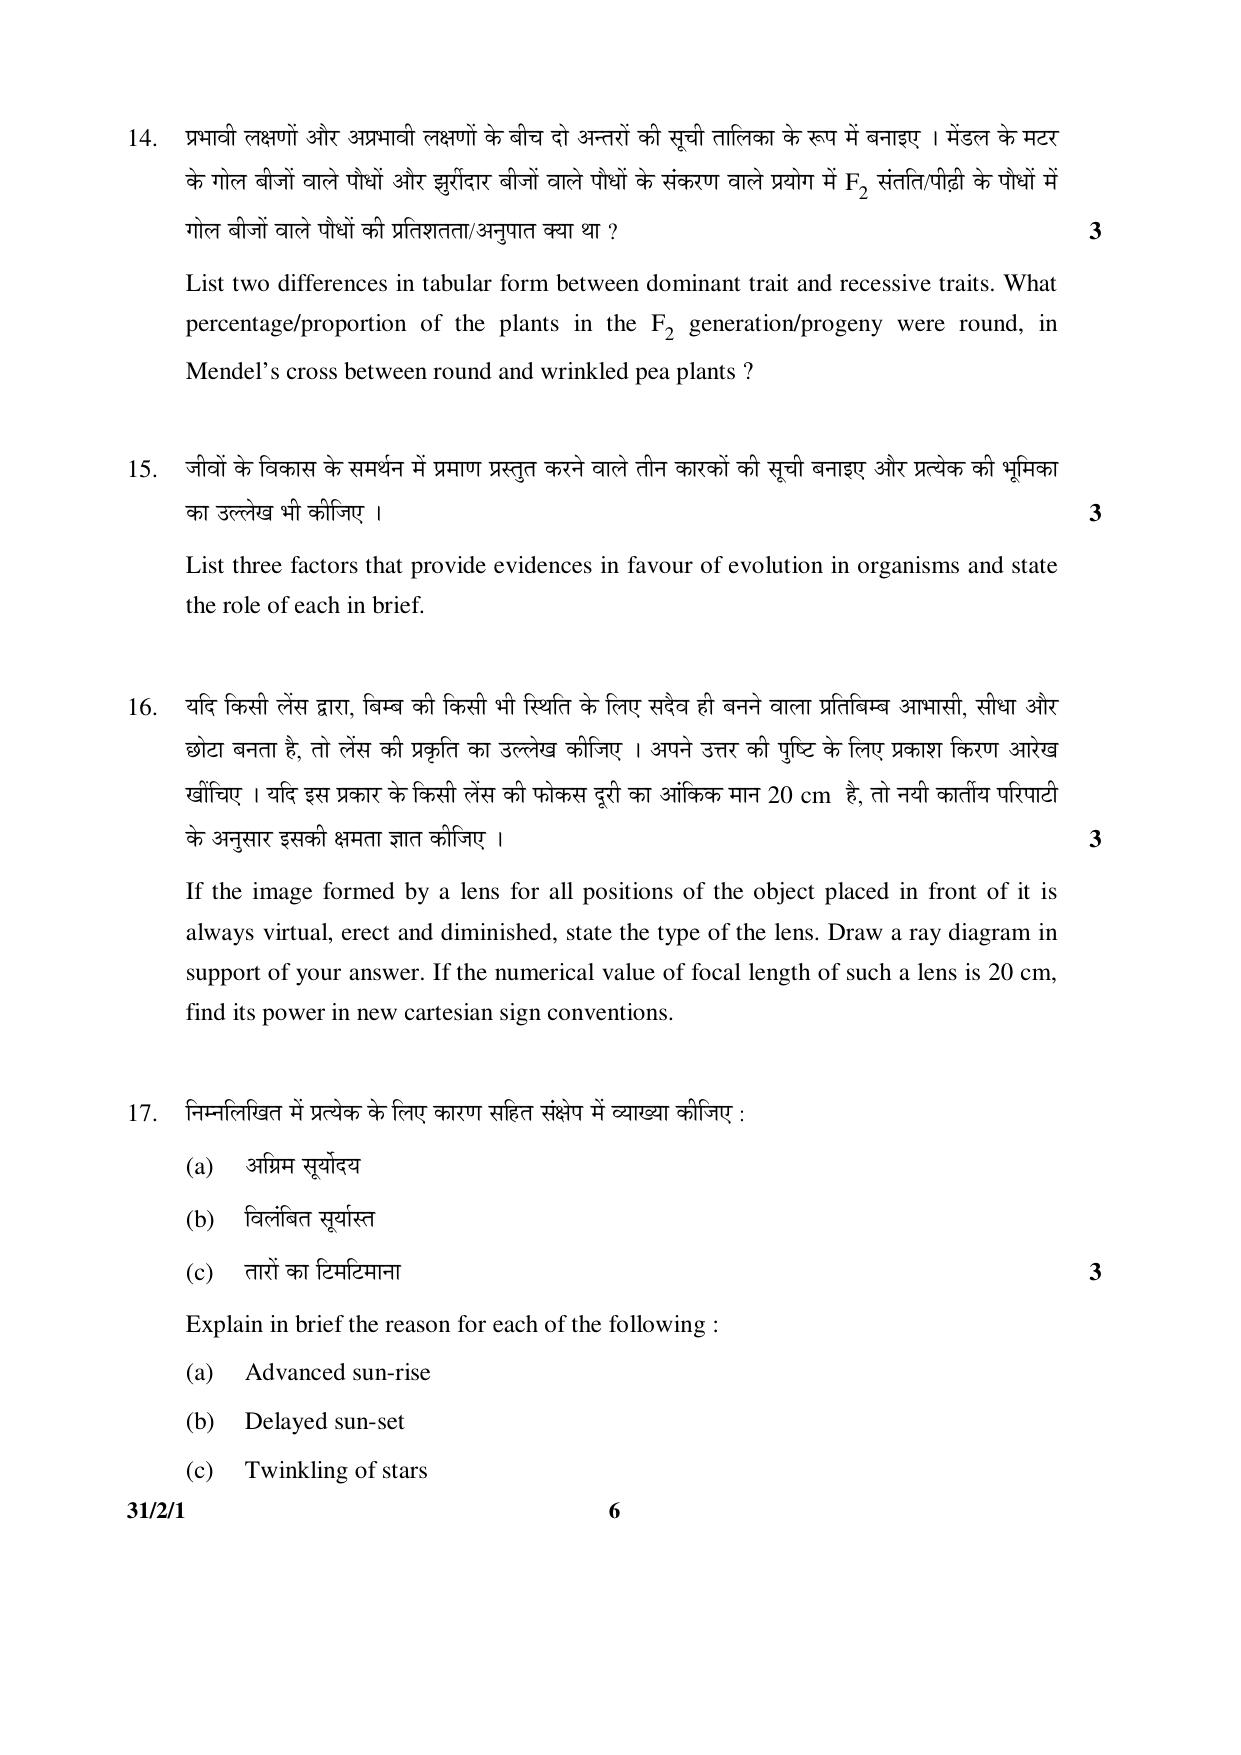 CBSE Class 10 31-2-1 _Science 2016 Question Paper - Page 6